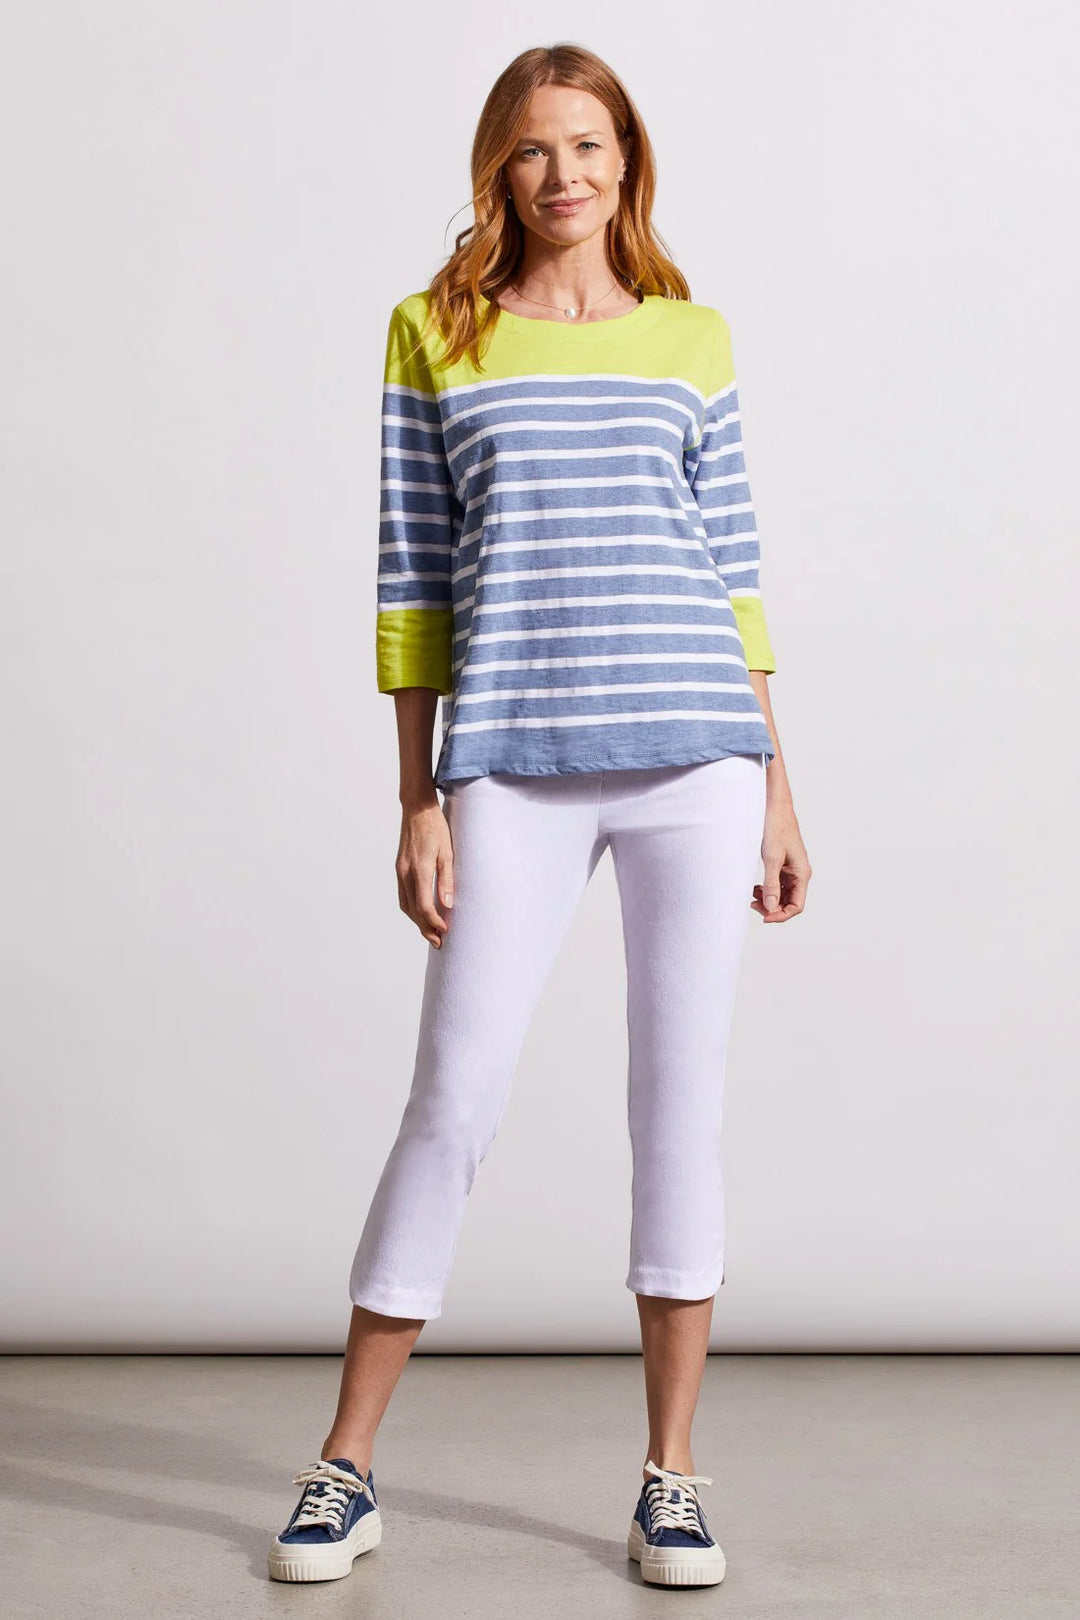 Tribal Printed Cotton Boatneck Colorblock Top